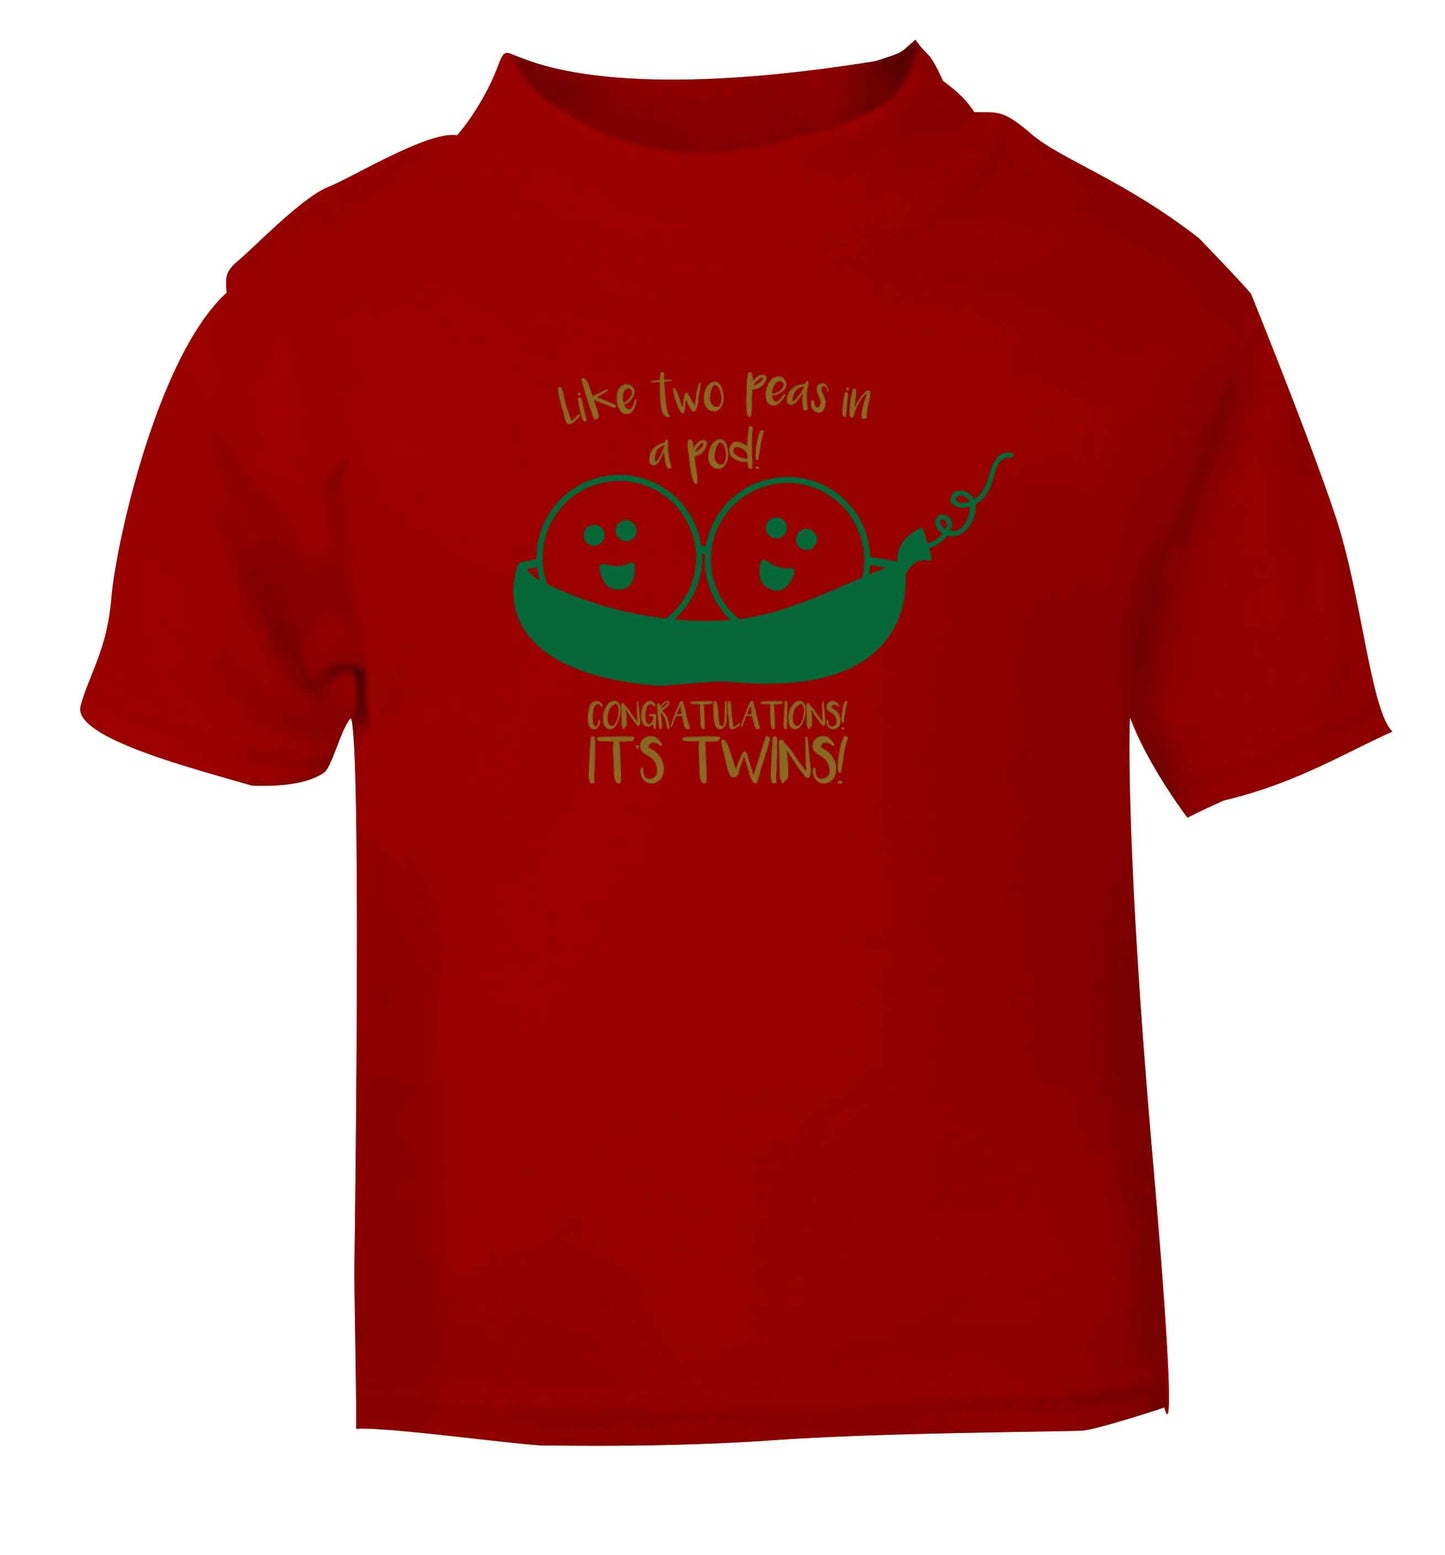 Like two peas in a pod! Congratulations it's twins! red baby toddler Tshirt 2 Years